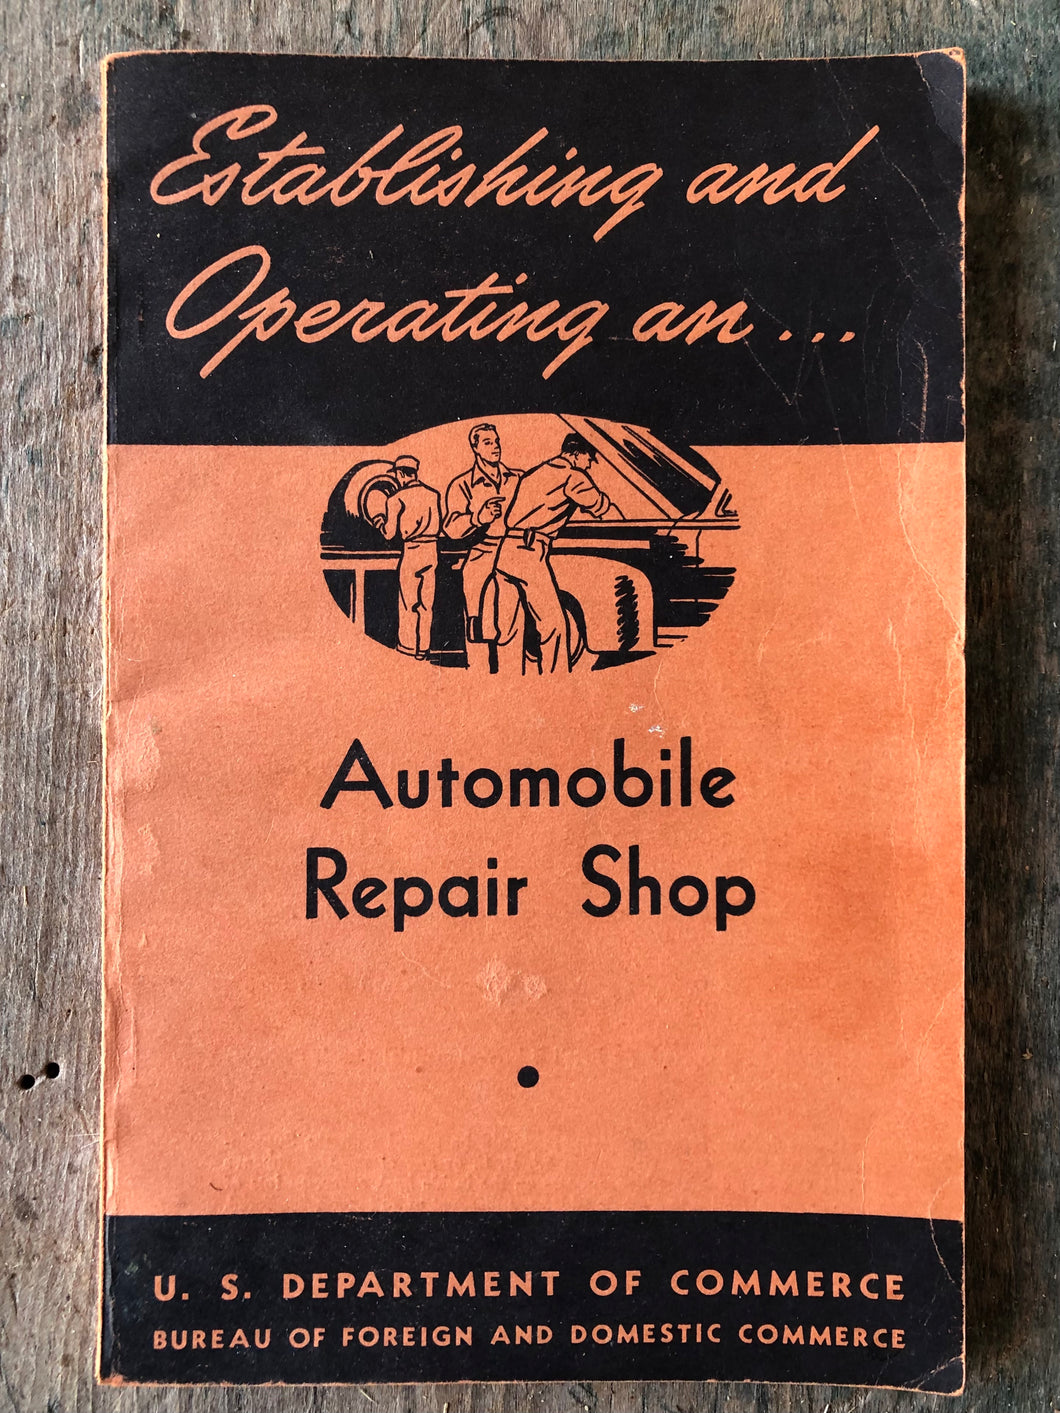 Establishing and Operating an Automobile Repair Shop. Industrial (Small Business) Series No. 24. Prepared by W. K. Toboldt